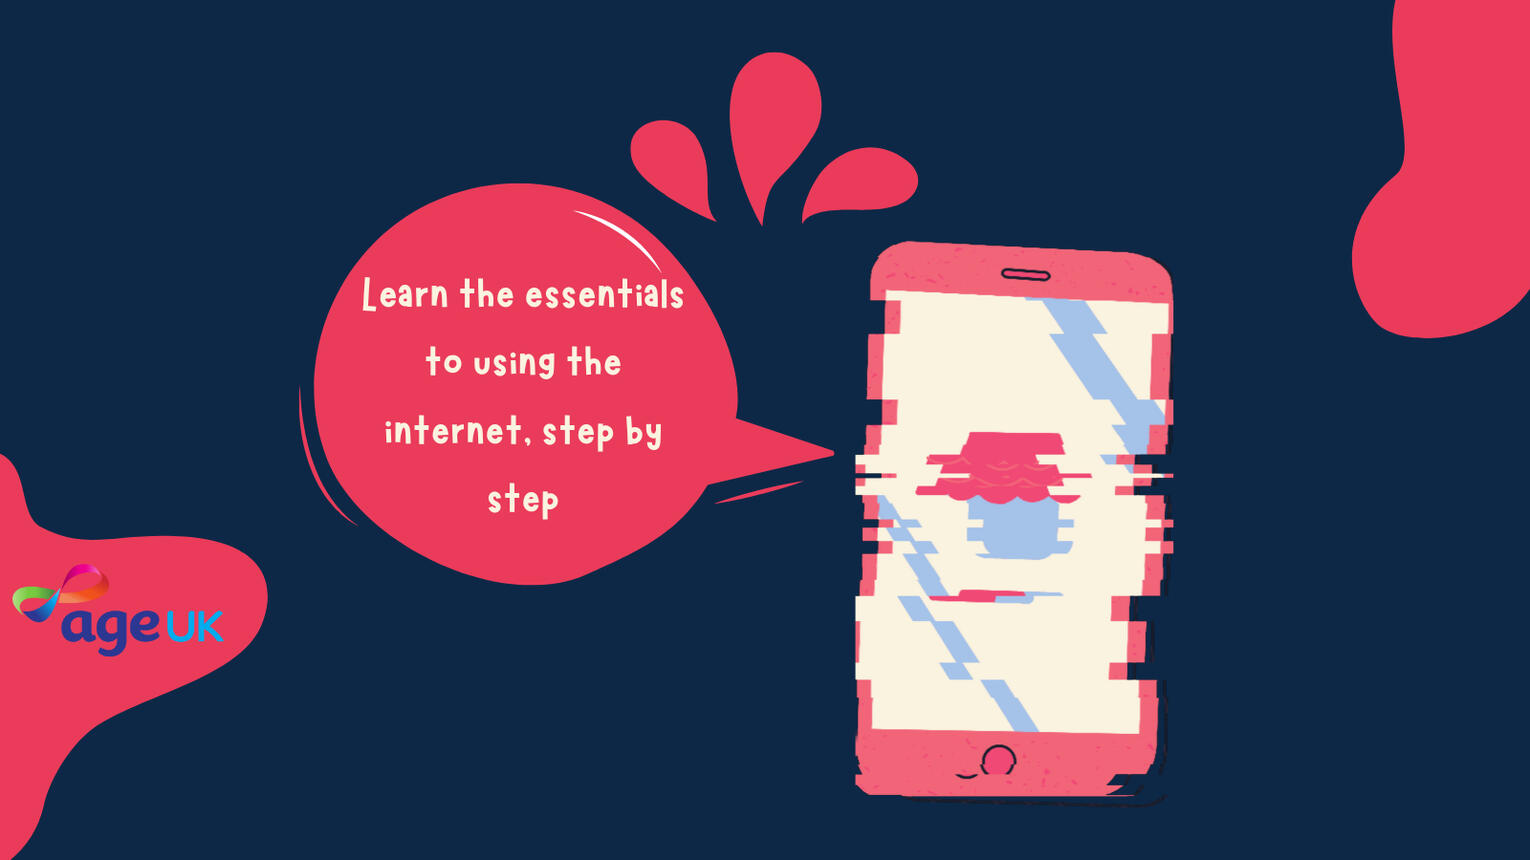 Learn the essentials to using the internet, step by step - age uk